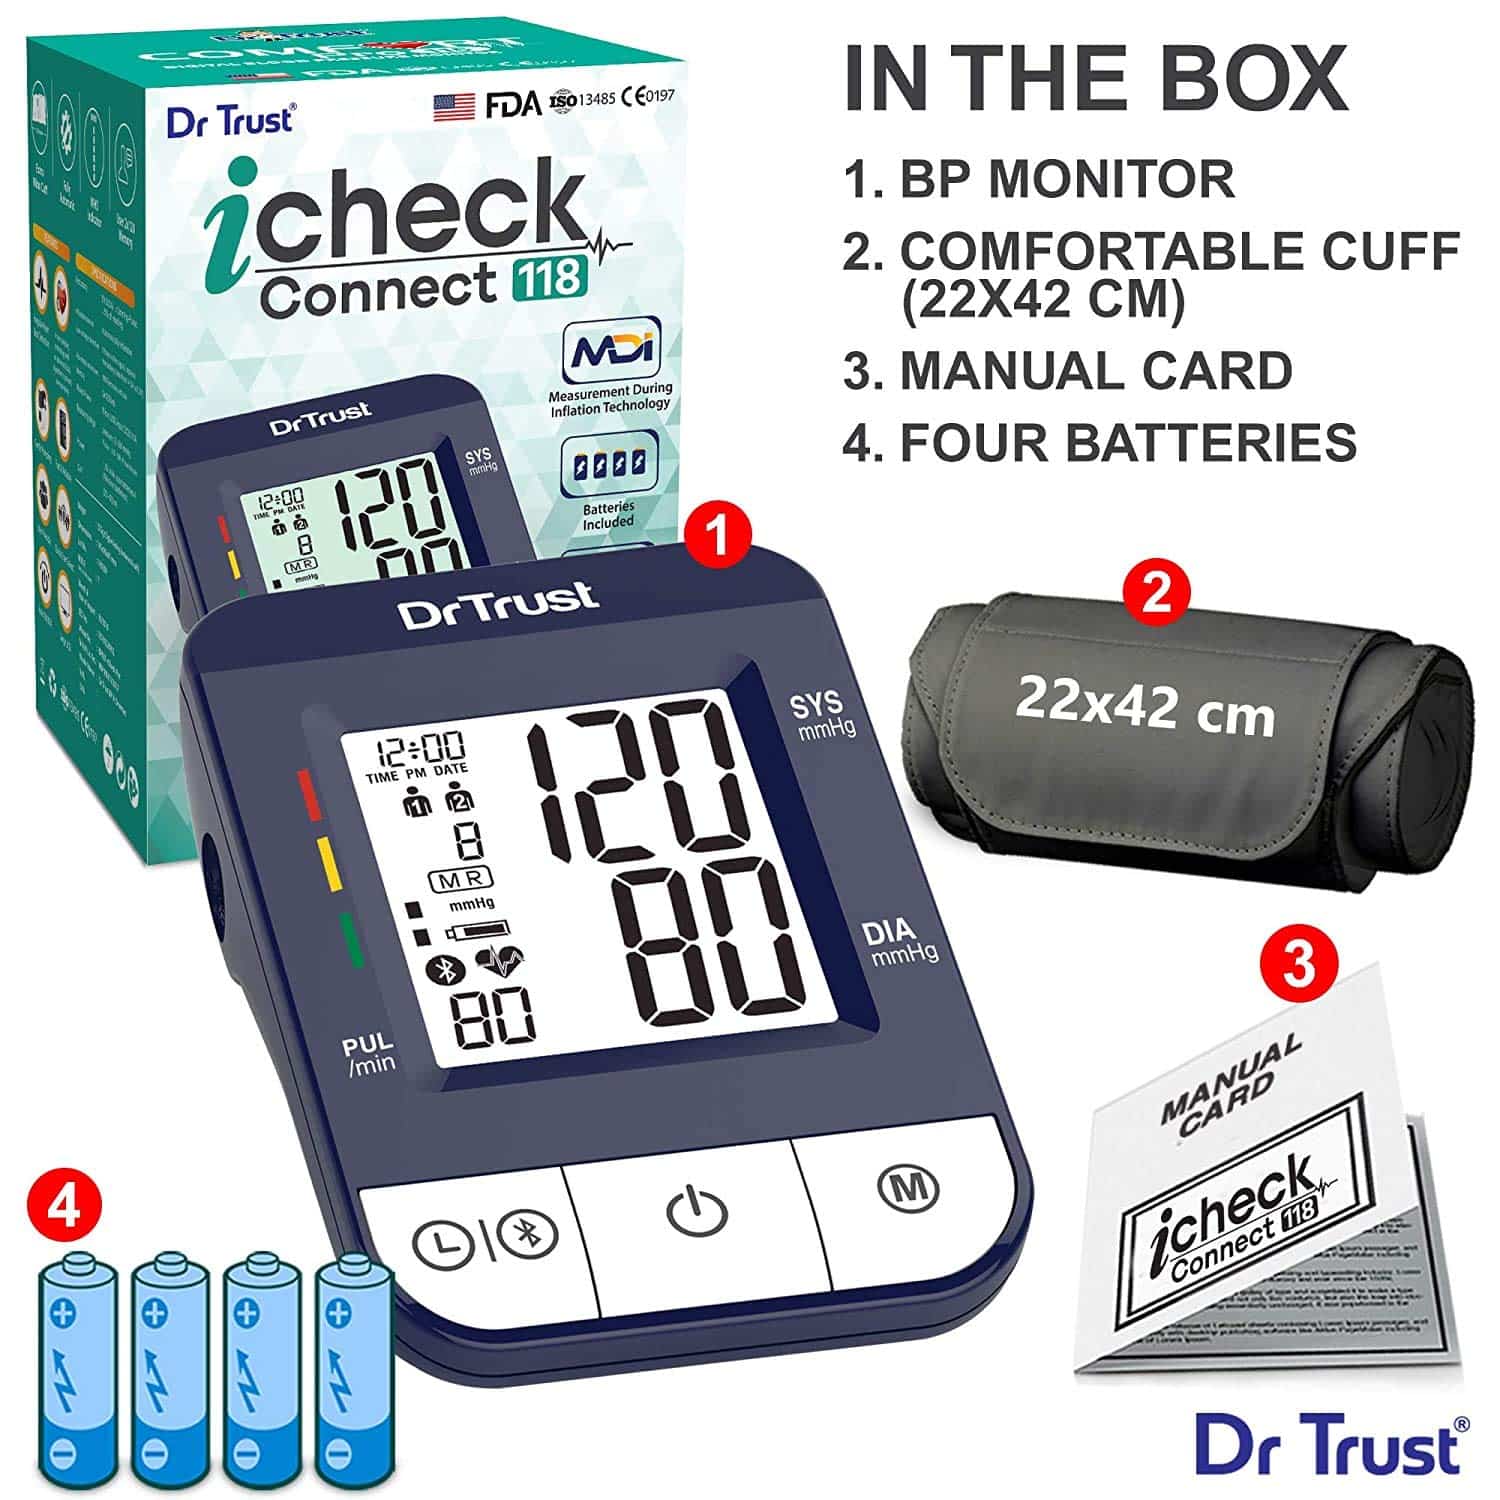 Dr-Trust-USA-Digital-Blood-Pressure-Monitor-Apparatus-and-Testing-Machine-with-USB-Port-Icheck-Bluetooth-Connect-Most-Accurate-BP-Checking-Instrument4.jpg